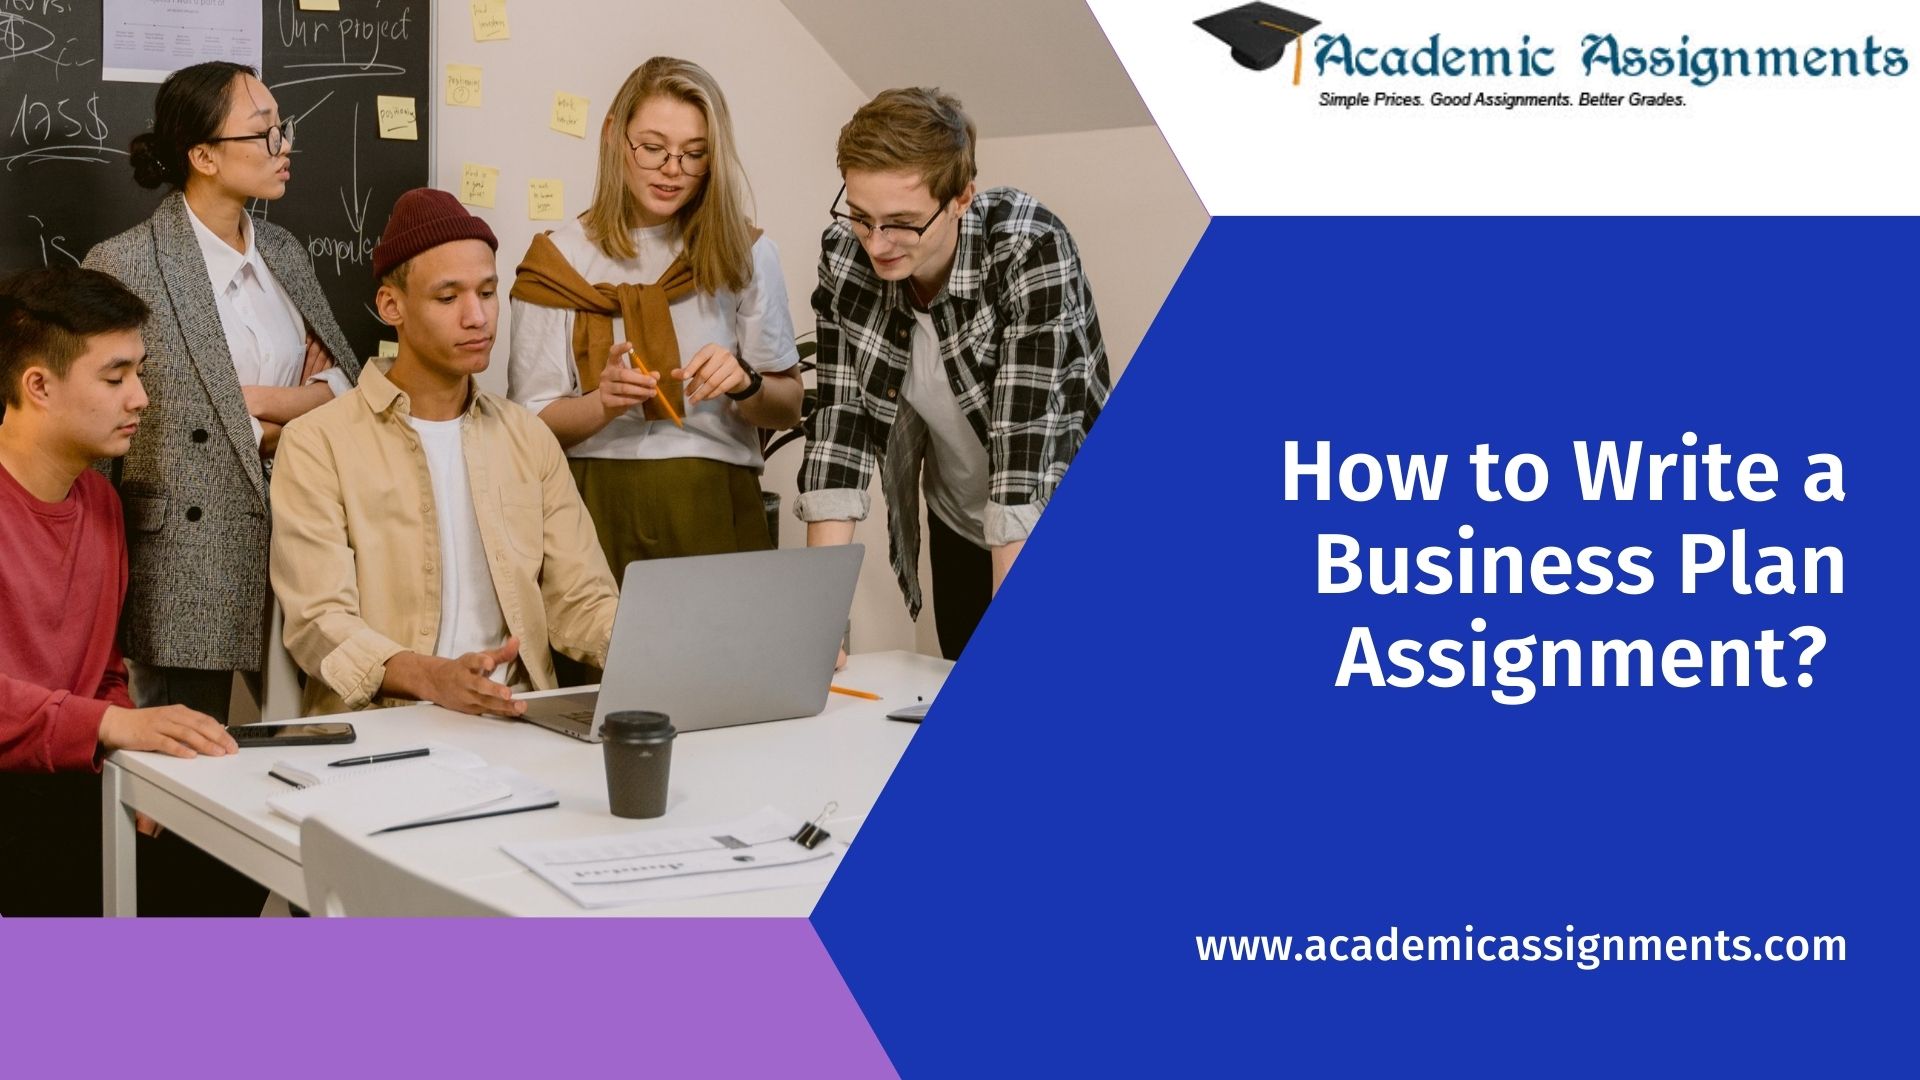 How to Write a Business Plan Assignment